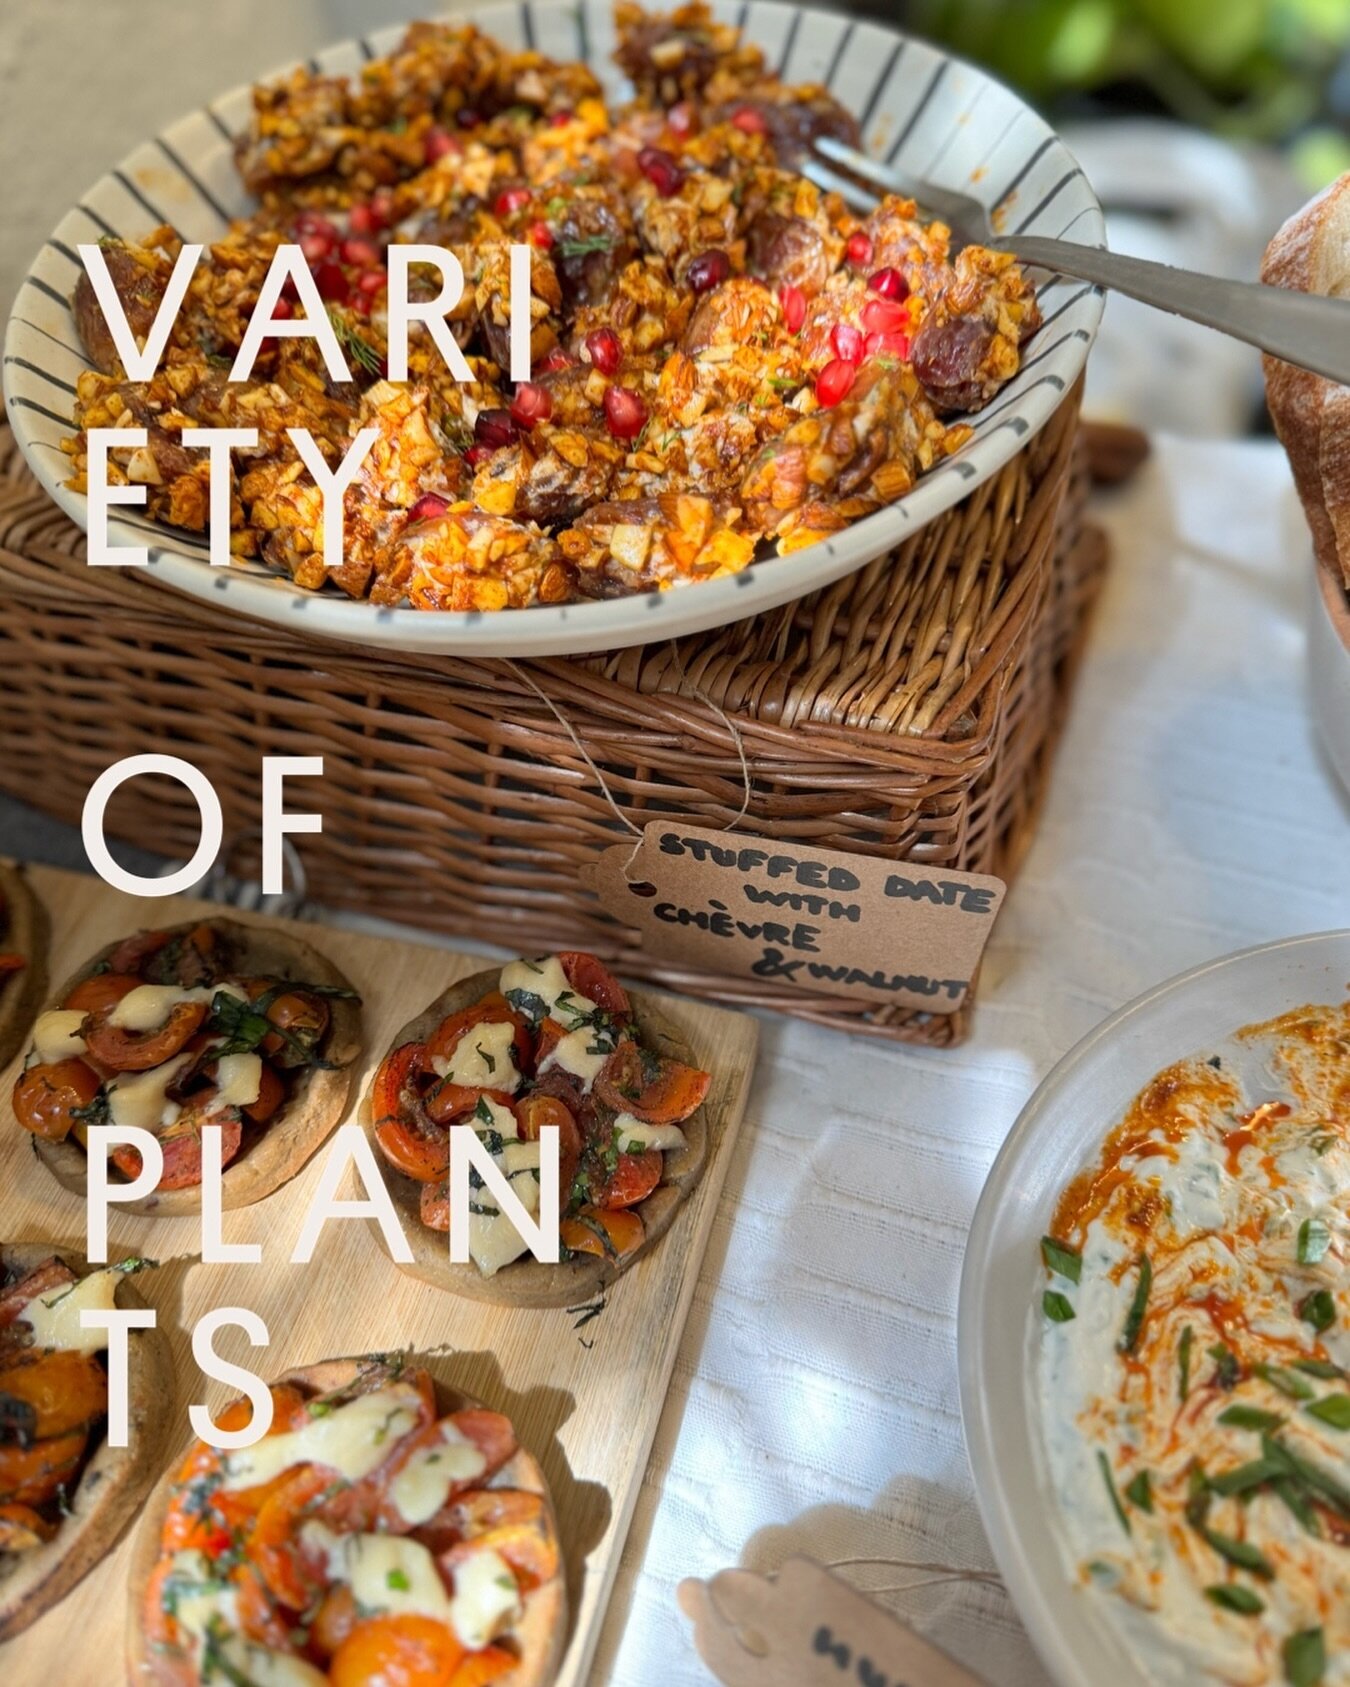 💫Variety of Plants is what we are all about at C+C. However you define your eating style (veg/non-veg/vegan or anything in between), you&rsquo;ll find something you love on our menu!
.
🌱 We can&rsquo;t wait to nourish you with the wide variety of w